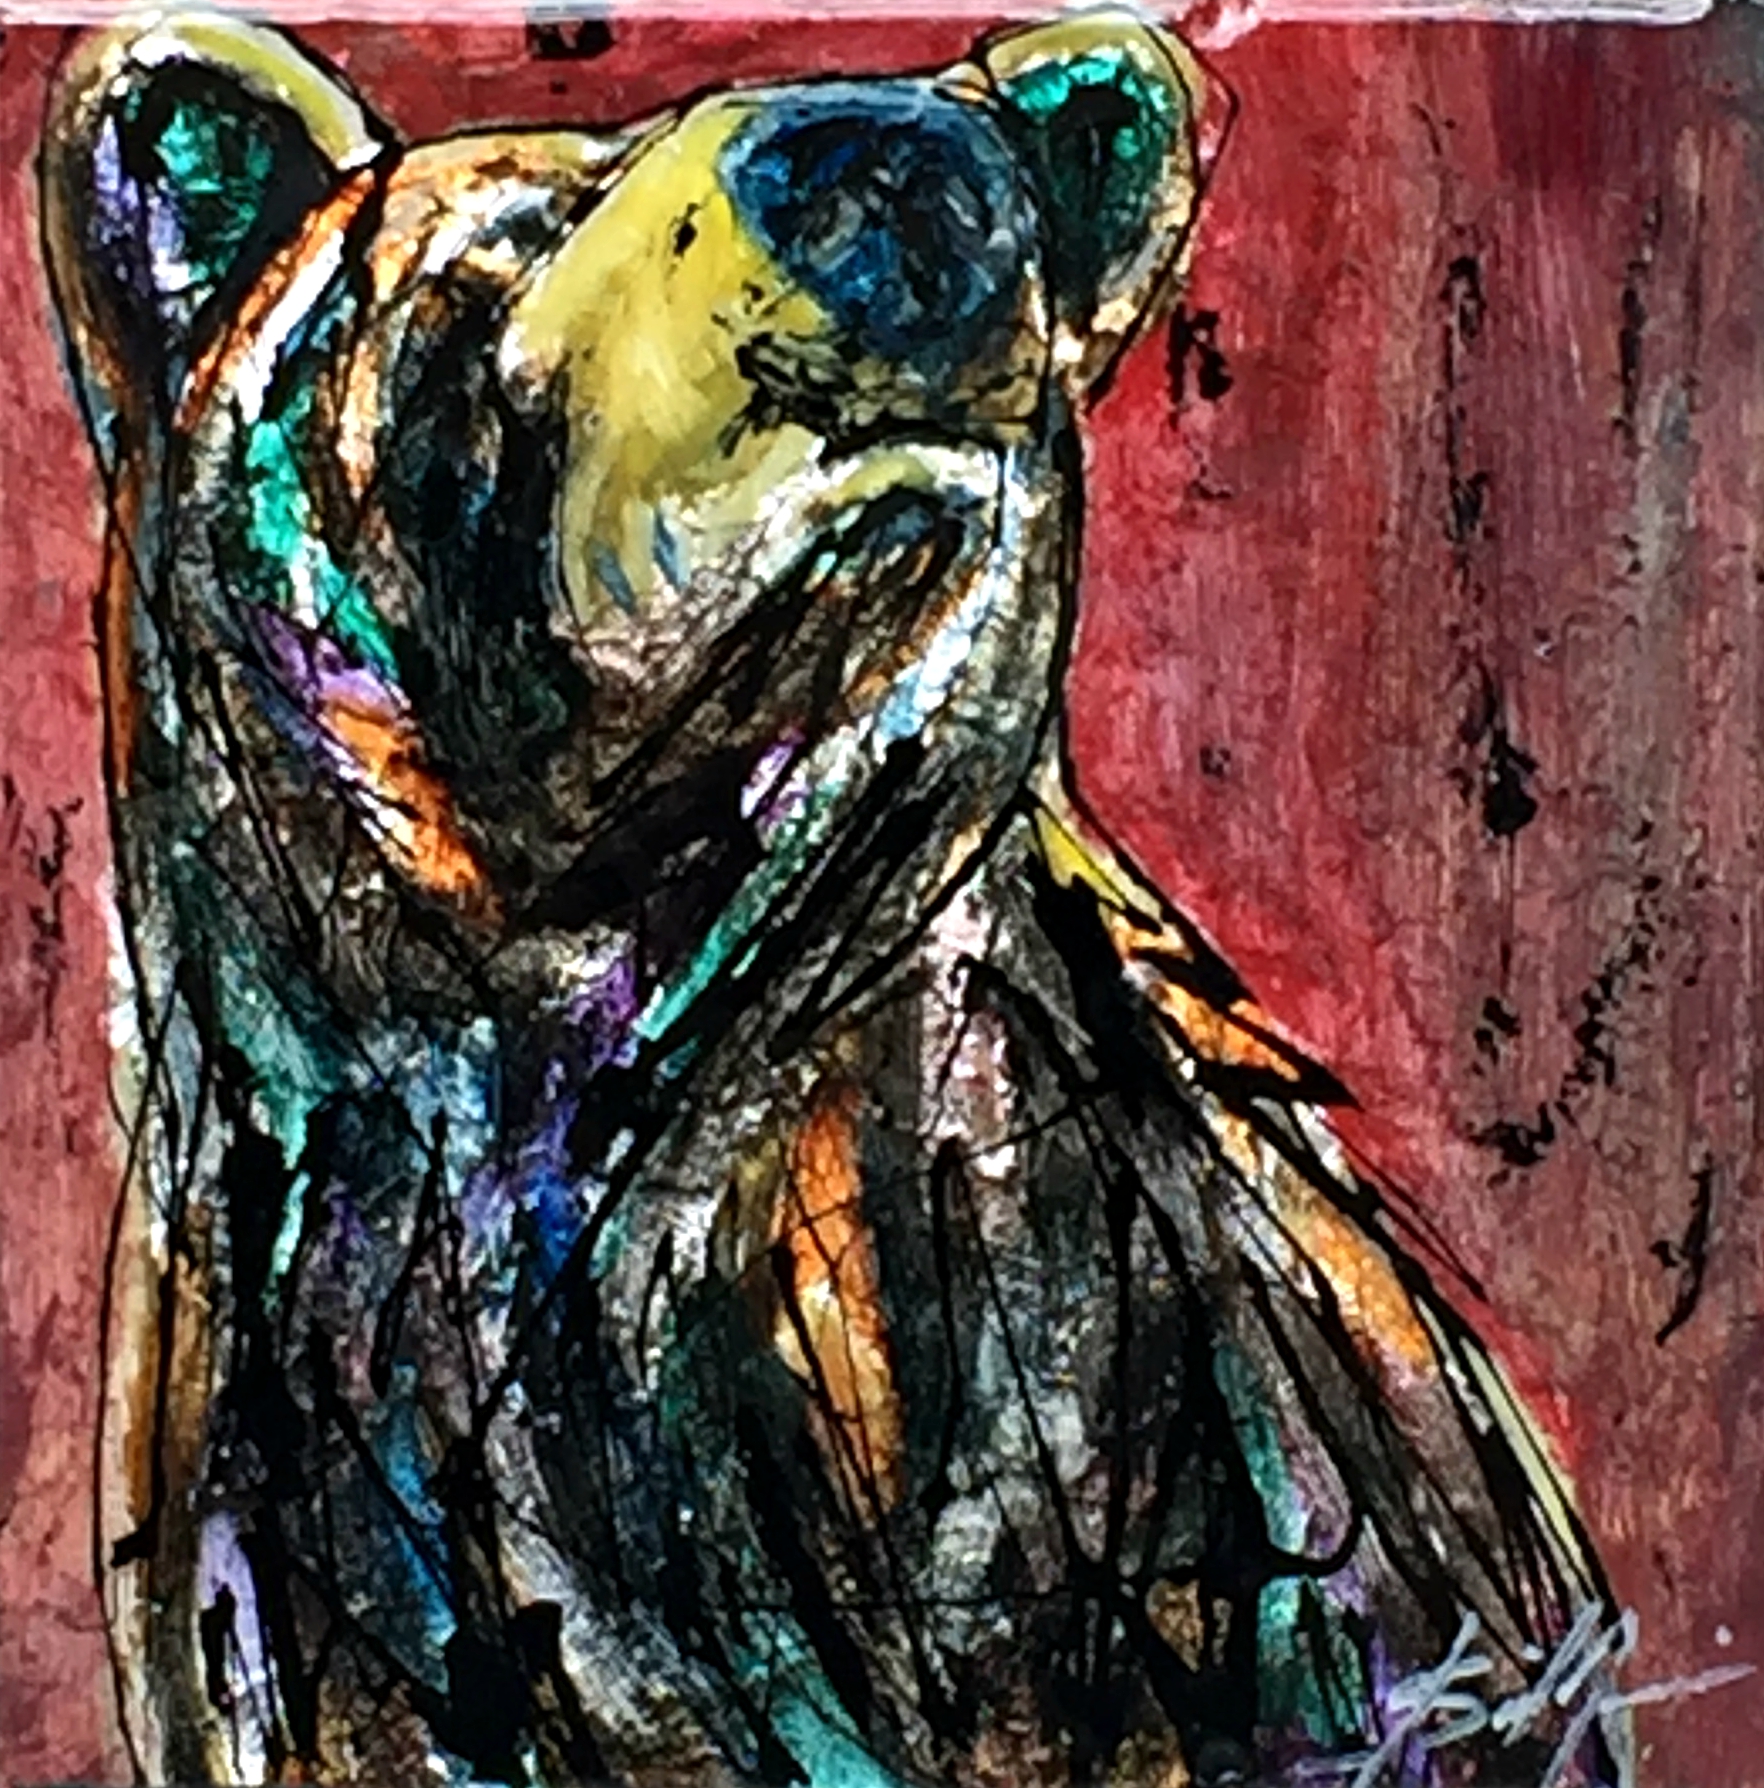 Not Interested, mixed media bear painting by David Zimmerman | Effusion Art Gallery + Cast Glass Studio, Invermere BC